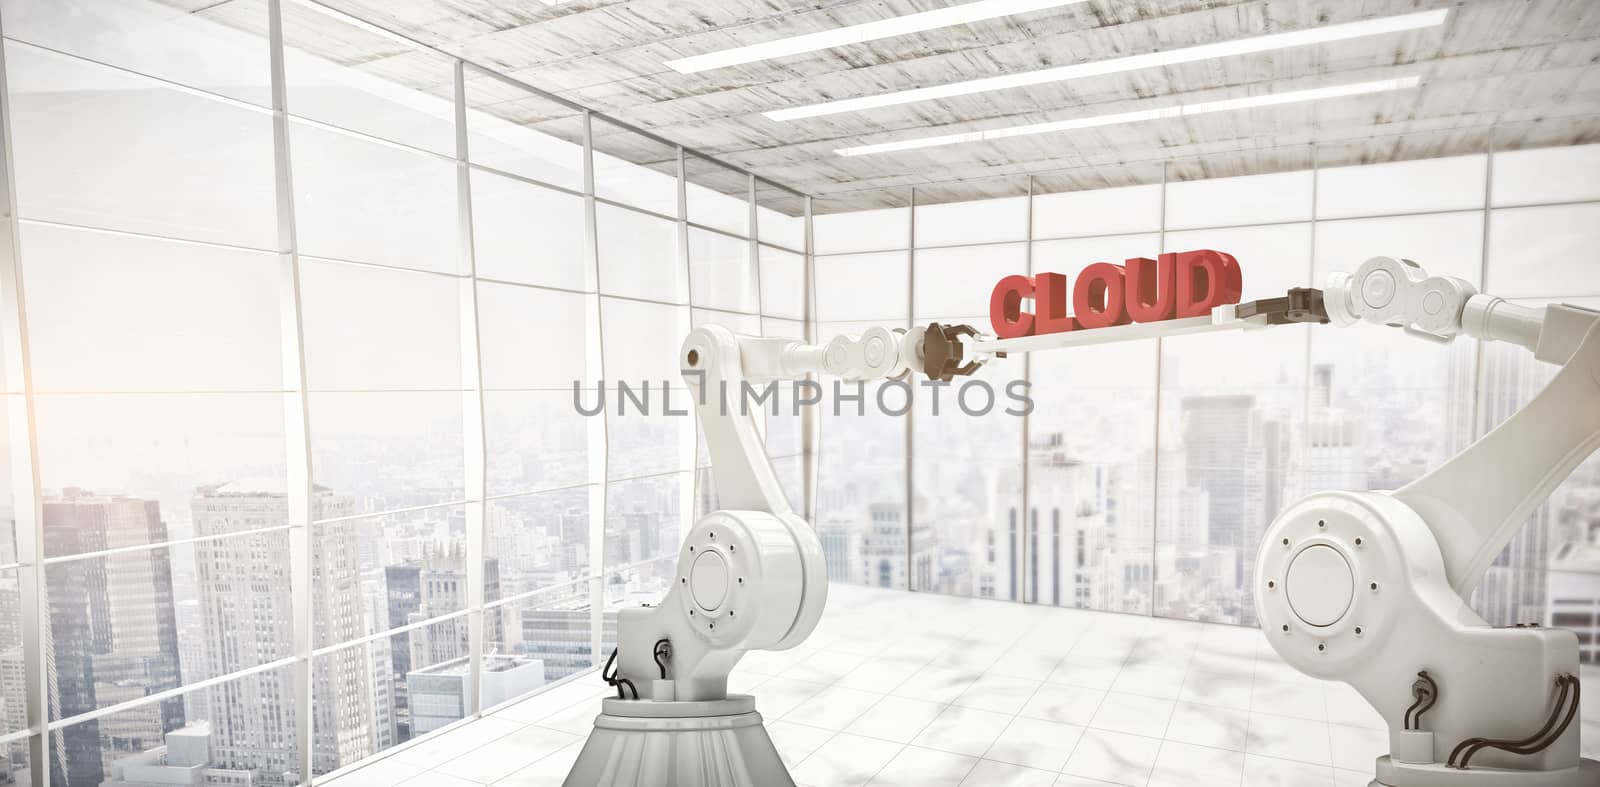 Mechanical robotic hands holding cloud text against white background against modern room overlooking city